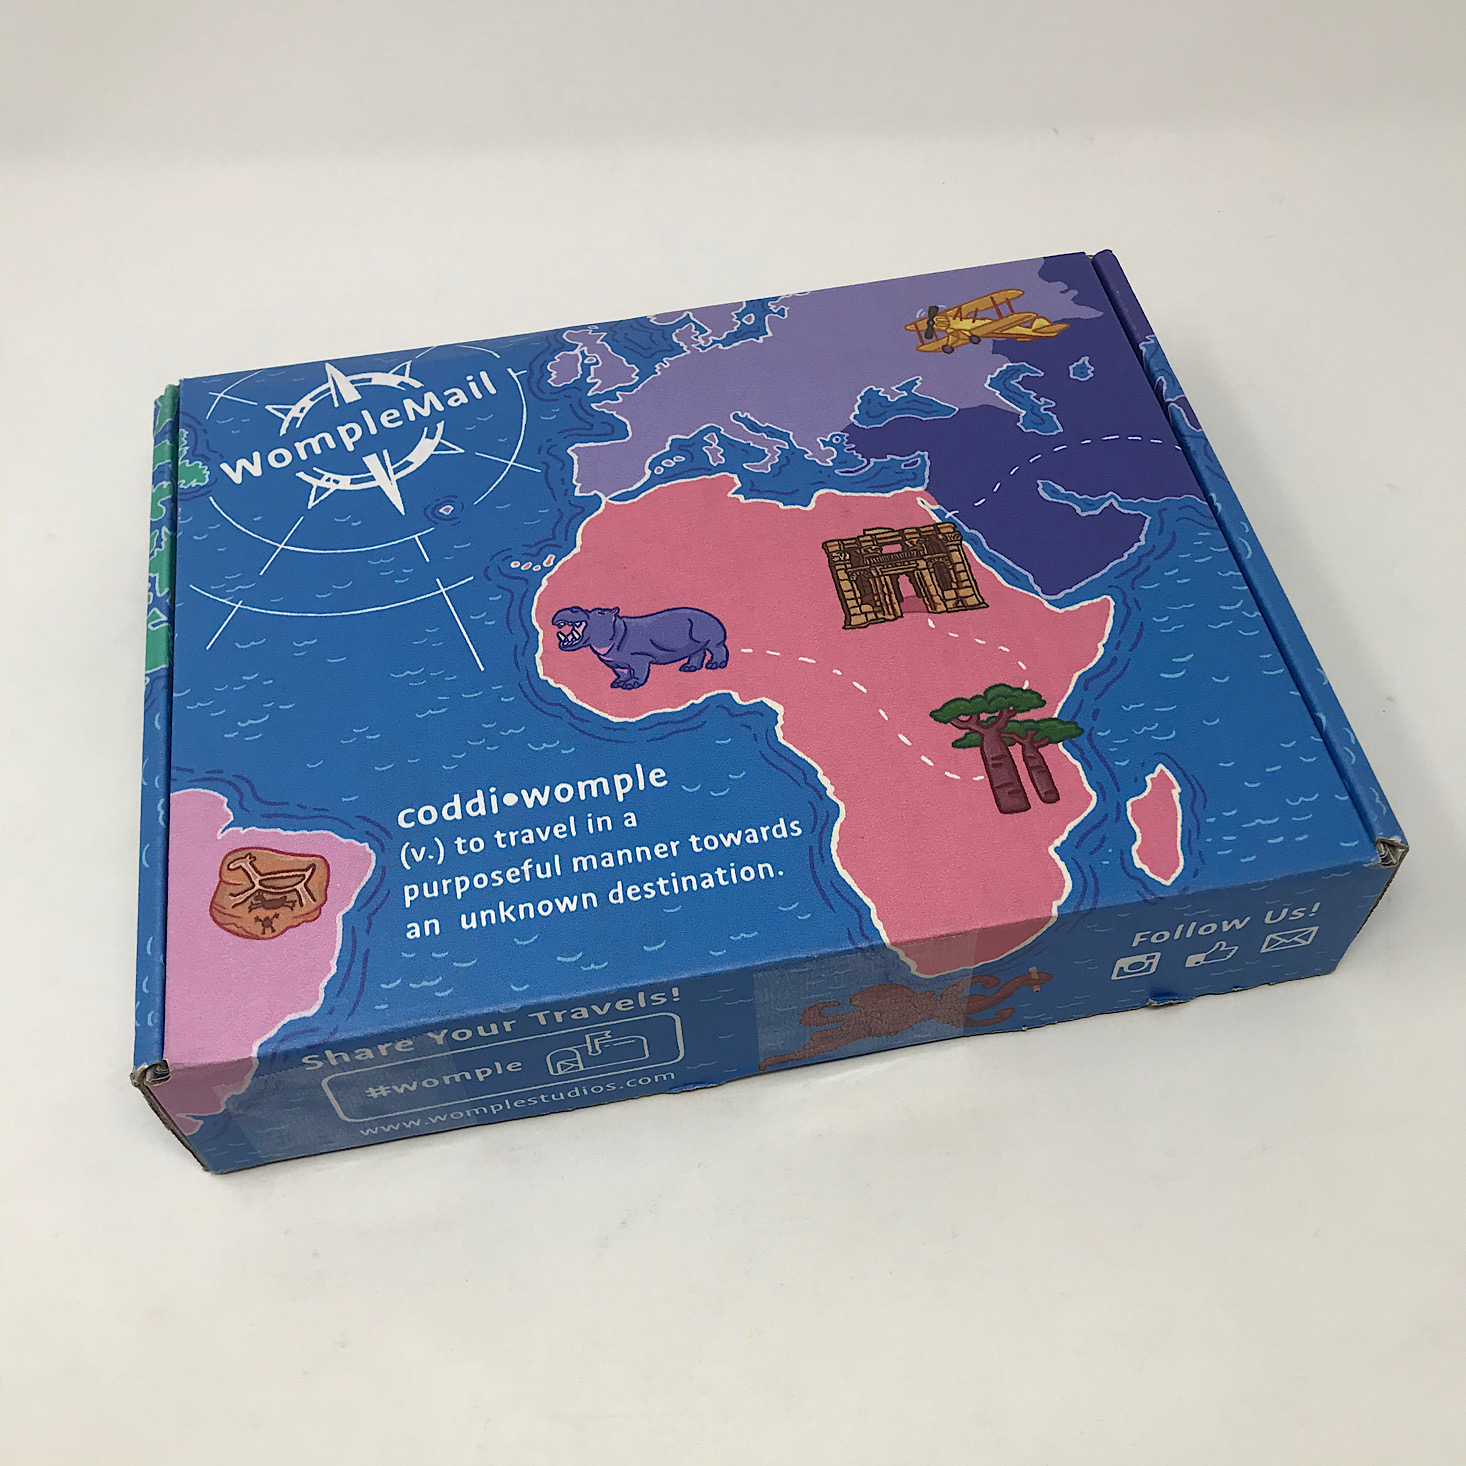 WompleMail “Tanzania” Box Review + Coupon – January 2020